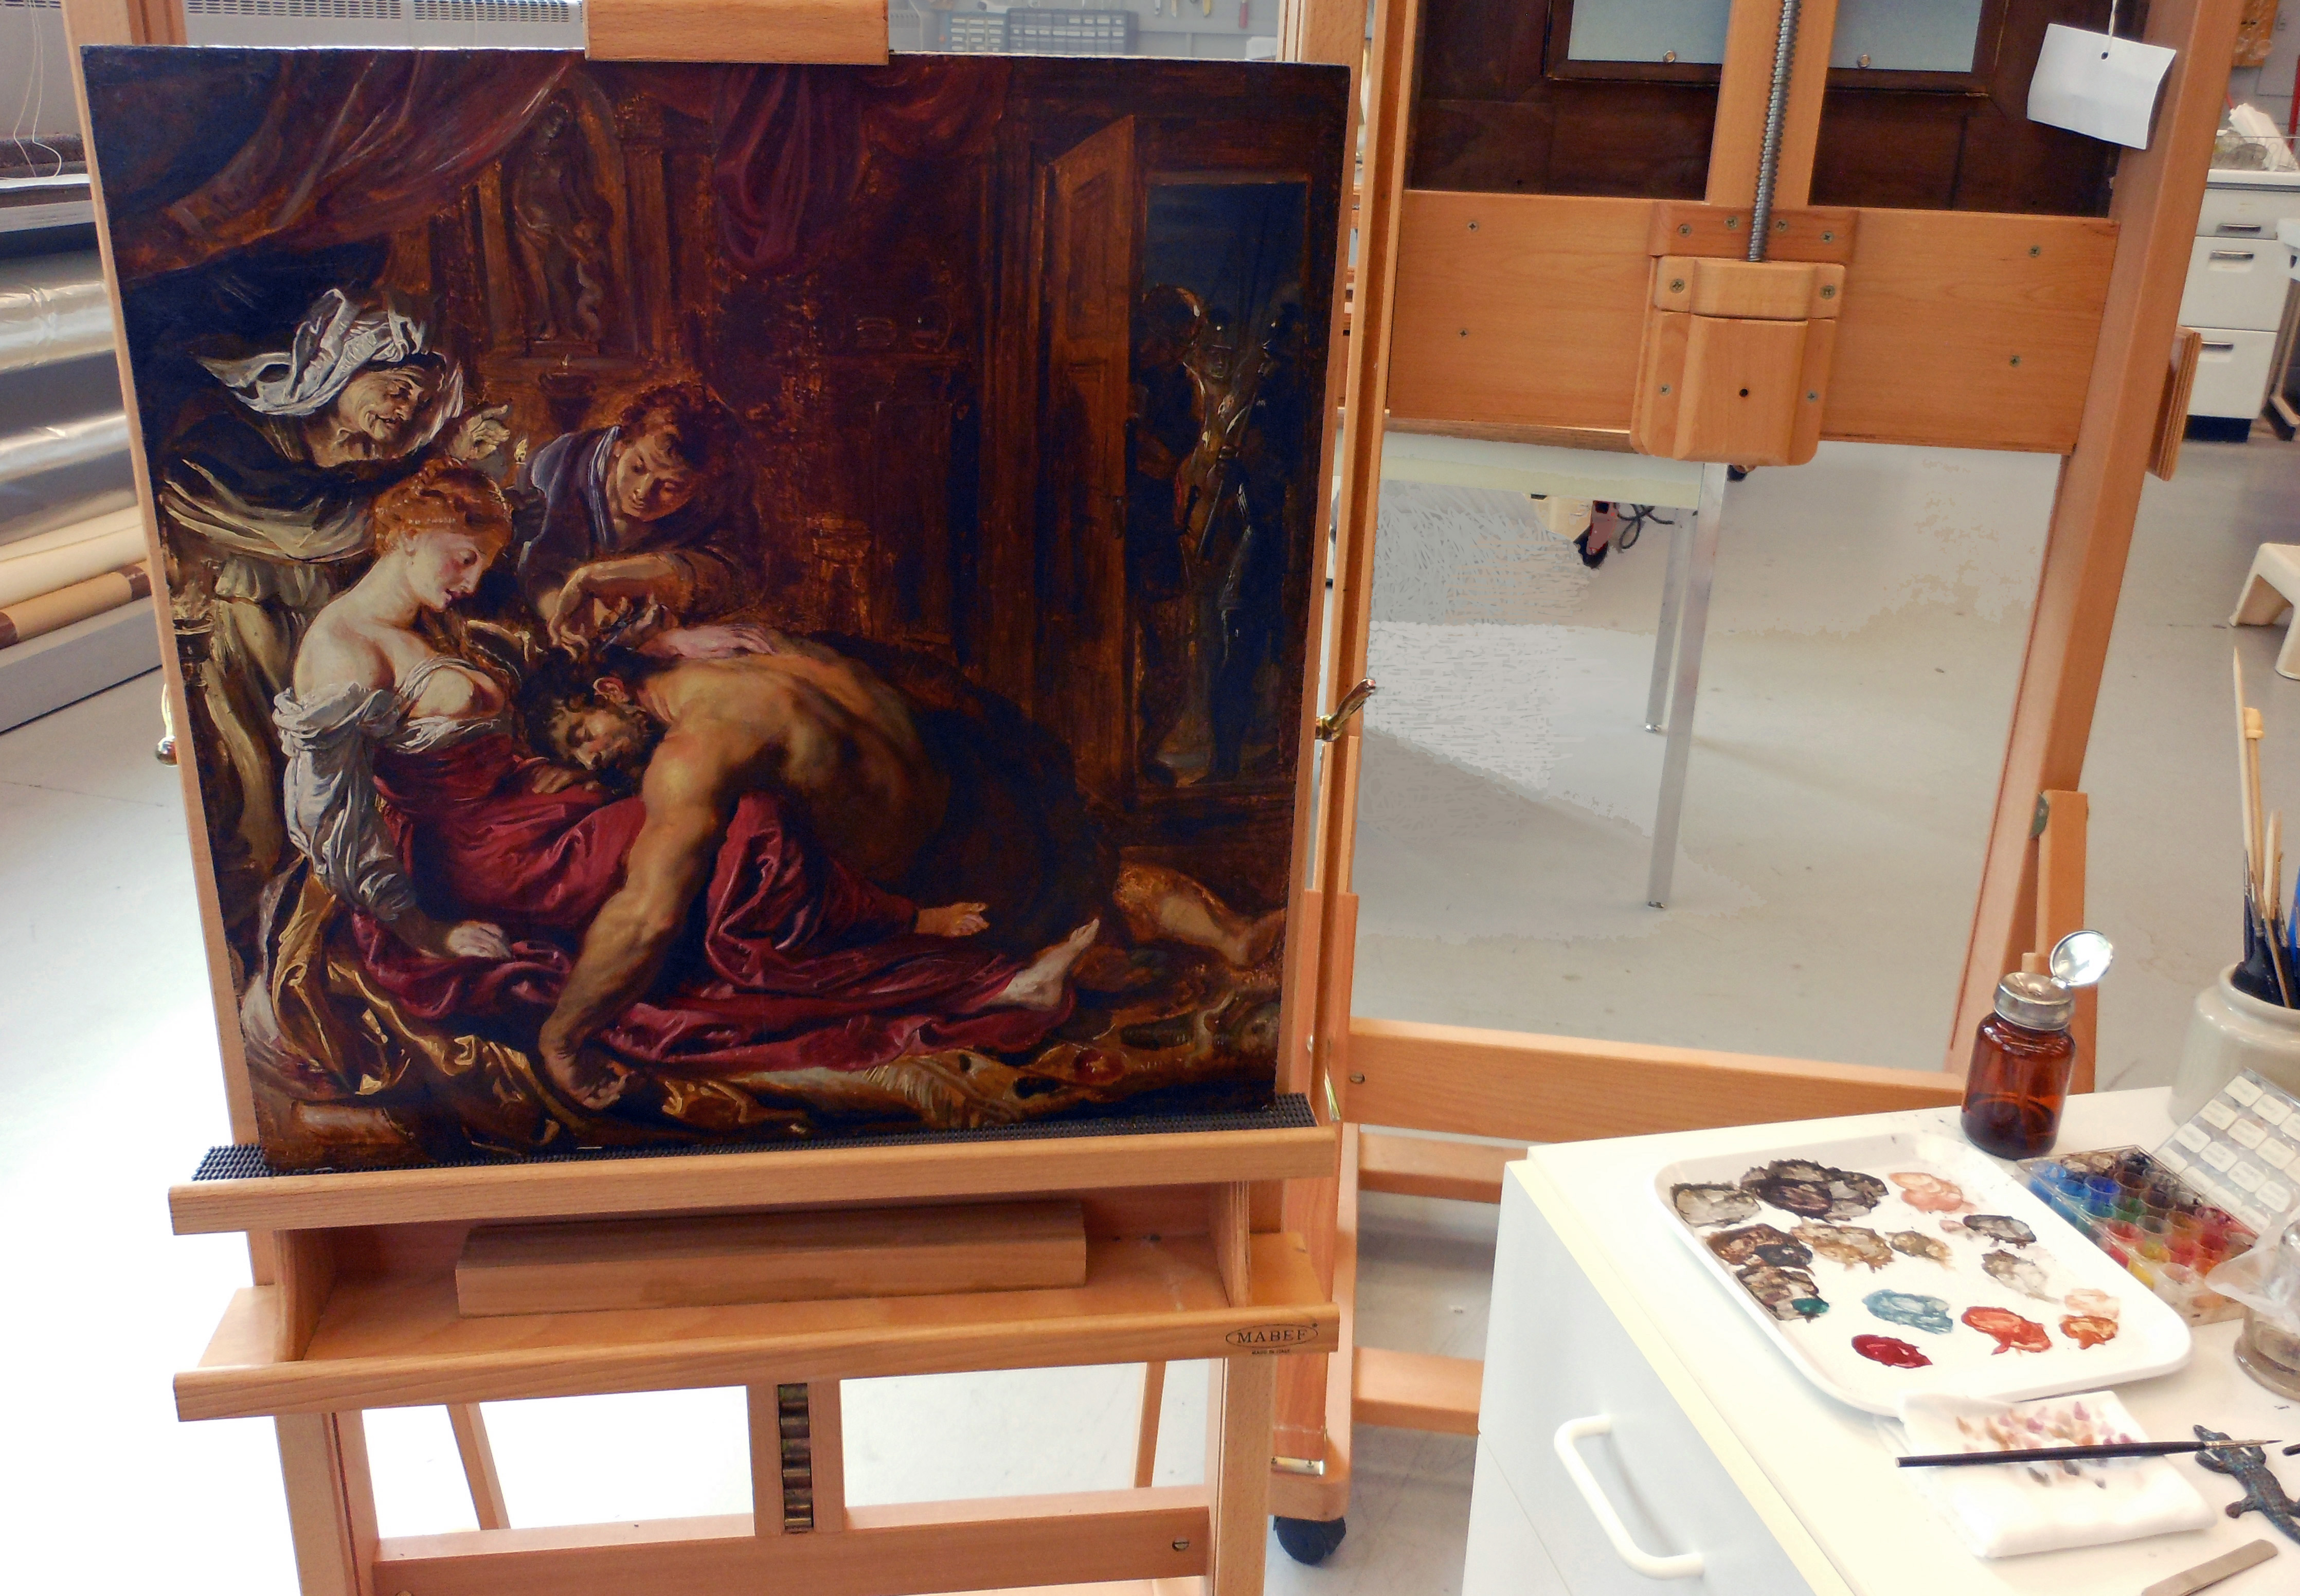 Samson and Delilah in conservation